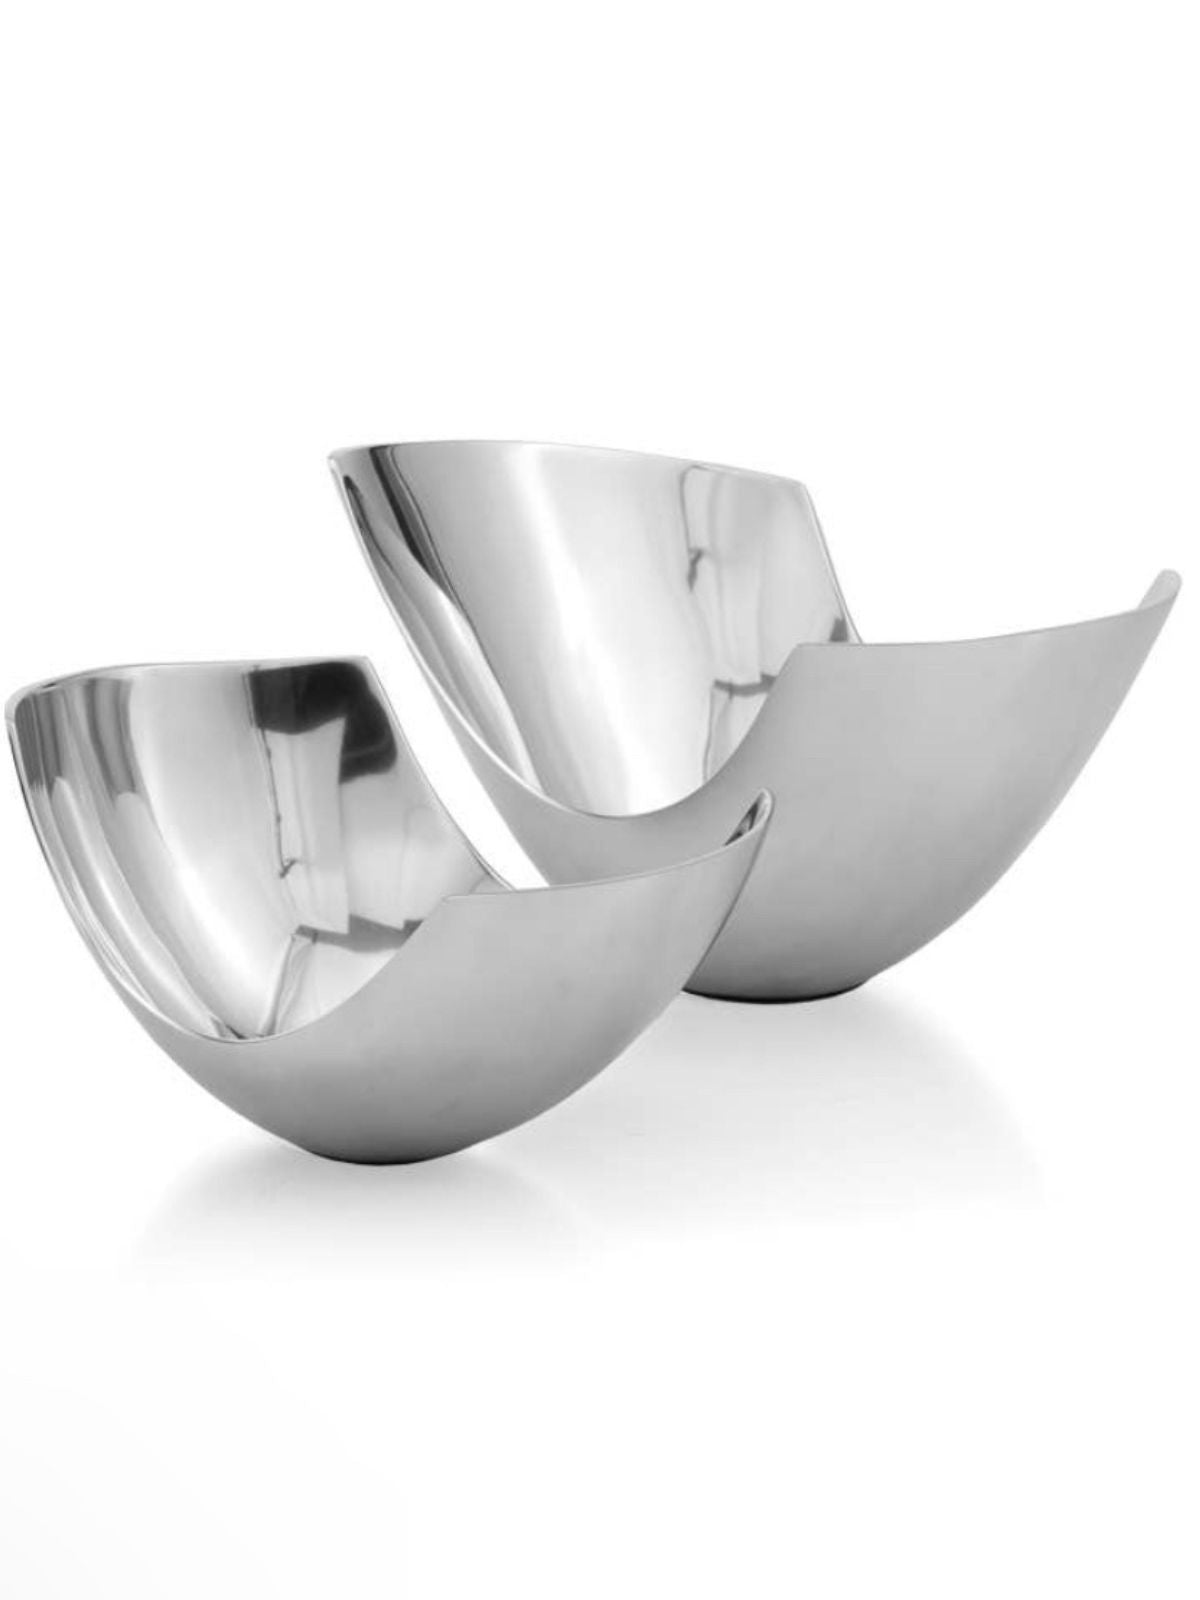 This set of 2 shiny silver decorative bowls are made from stainless steel material.